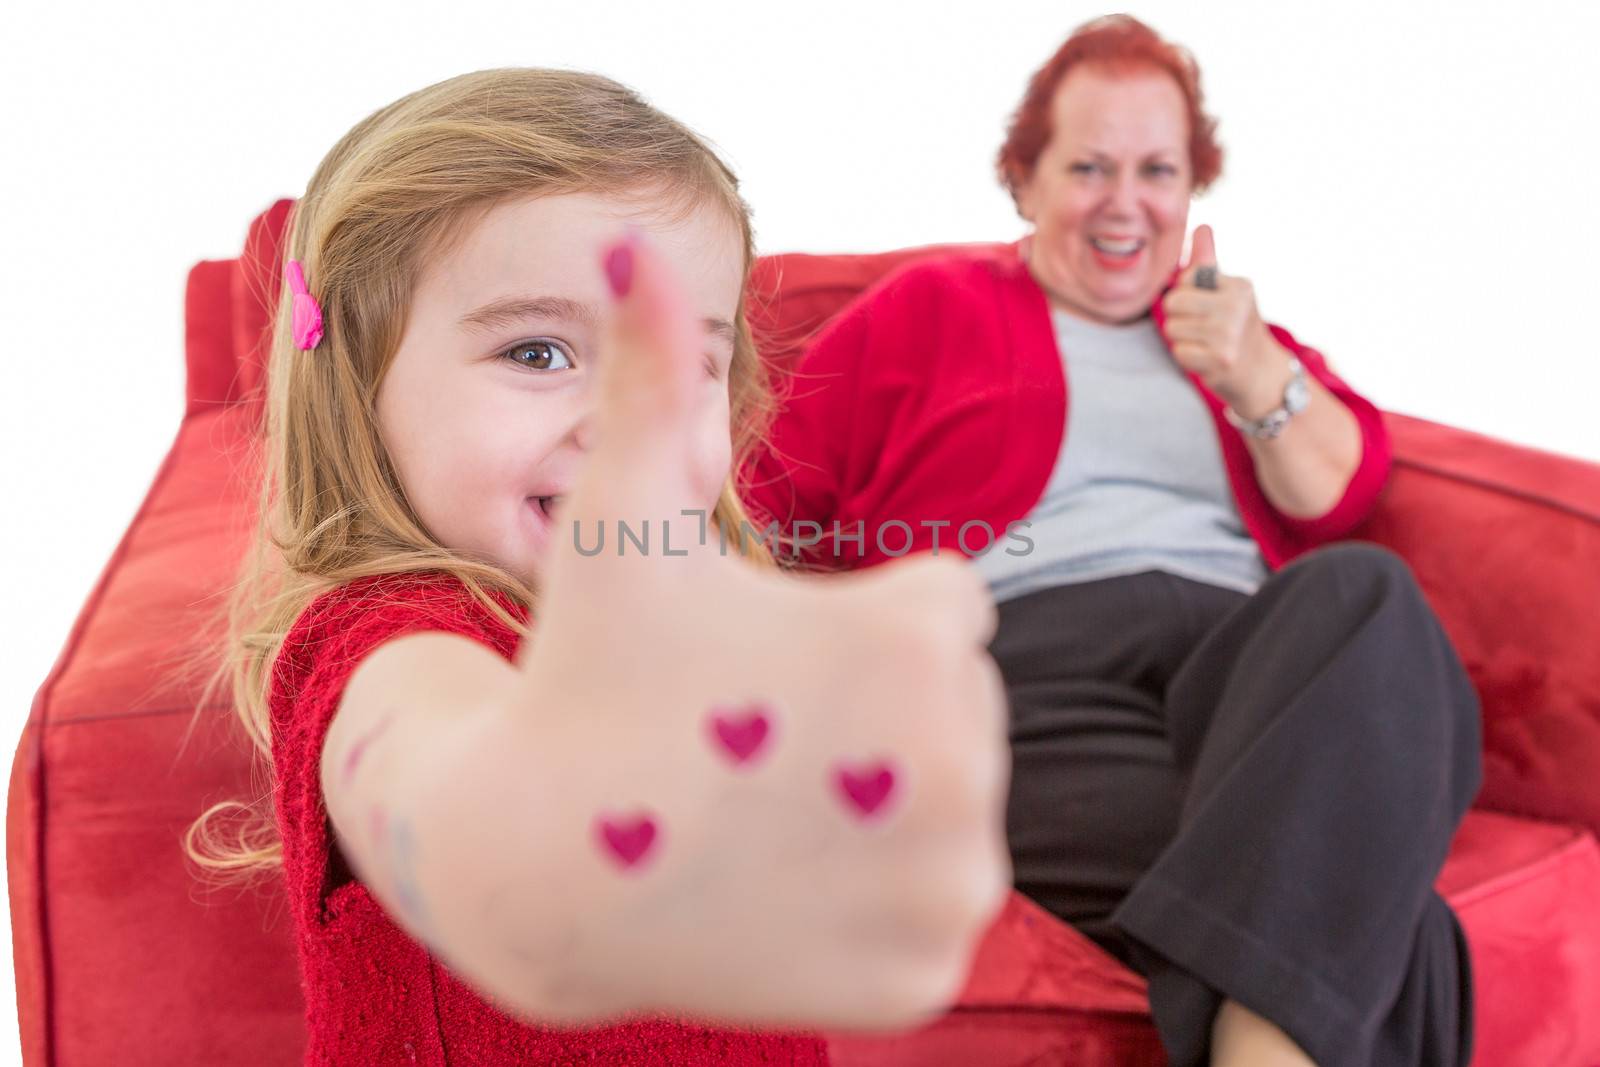 Cute little girl with red hearts painted on her hand giving a thumbs up gesture of approval with her grandmother who is seated on a red sofa behind her